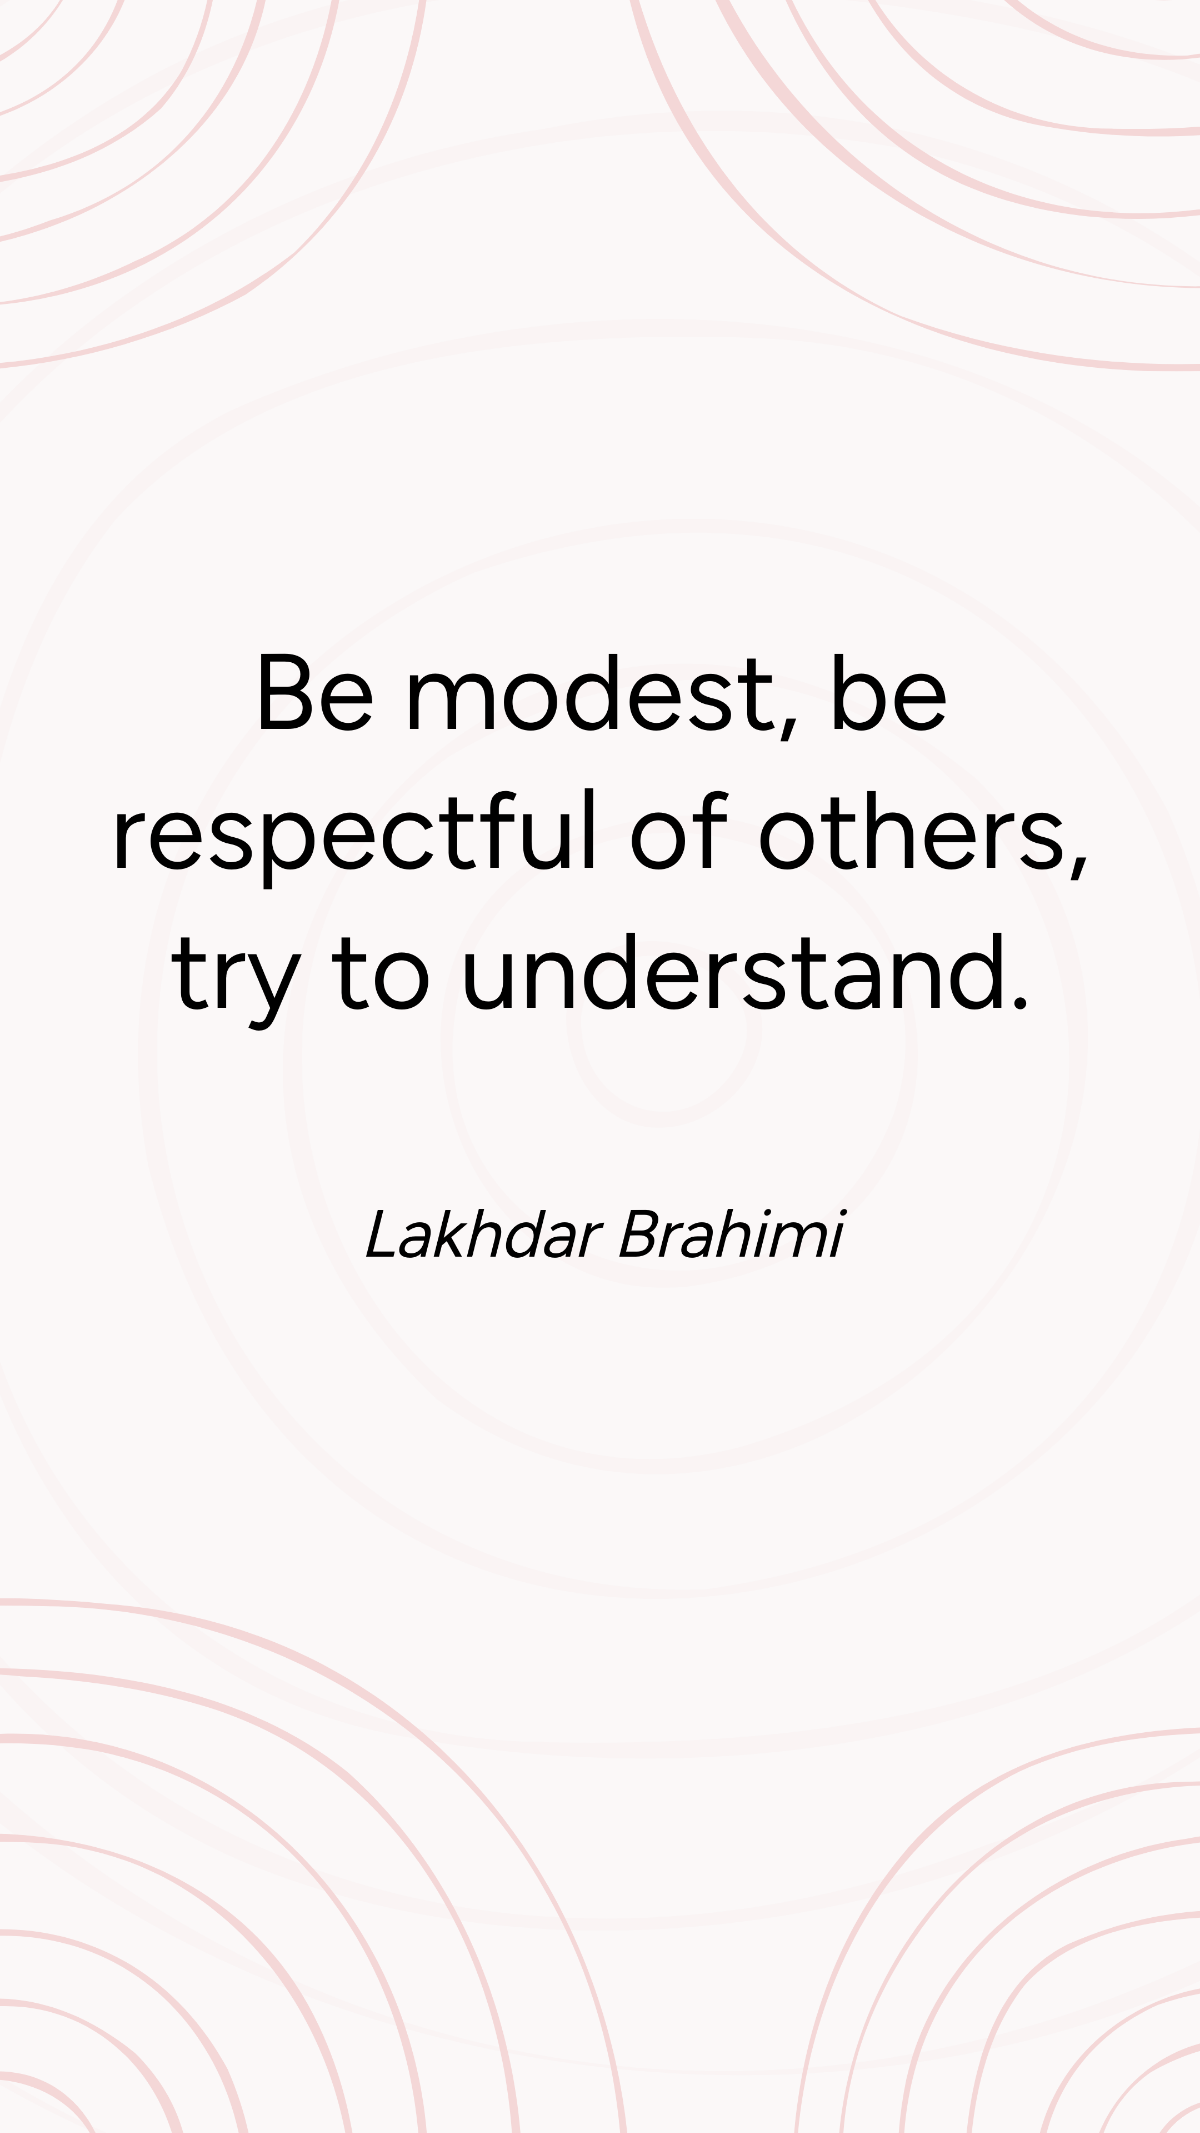 Lakhdar Brahimi - Be modest, be respectful of others, try to understand. Template